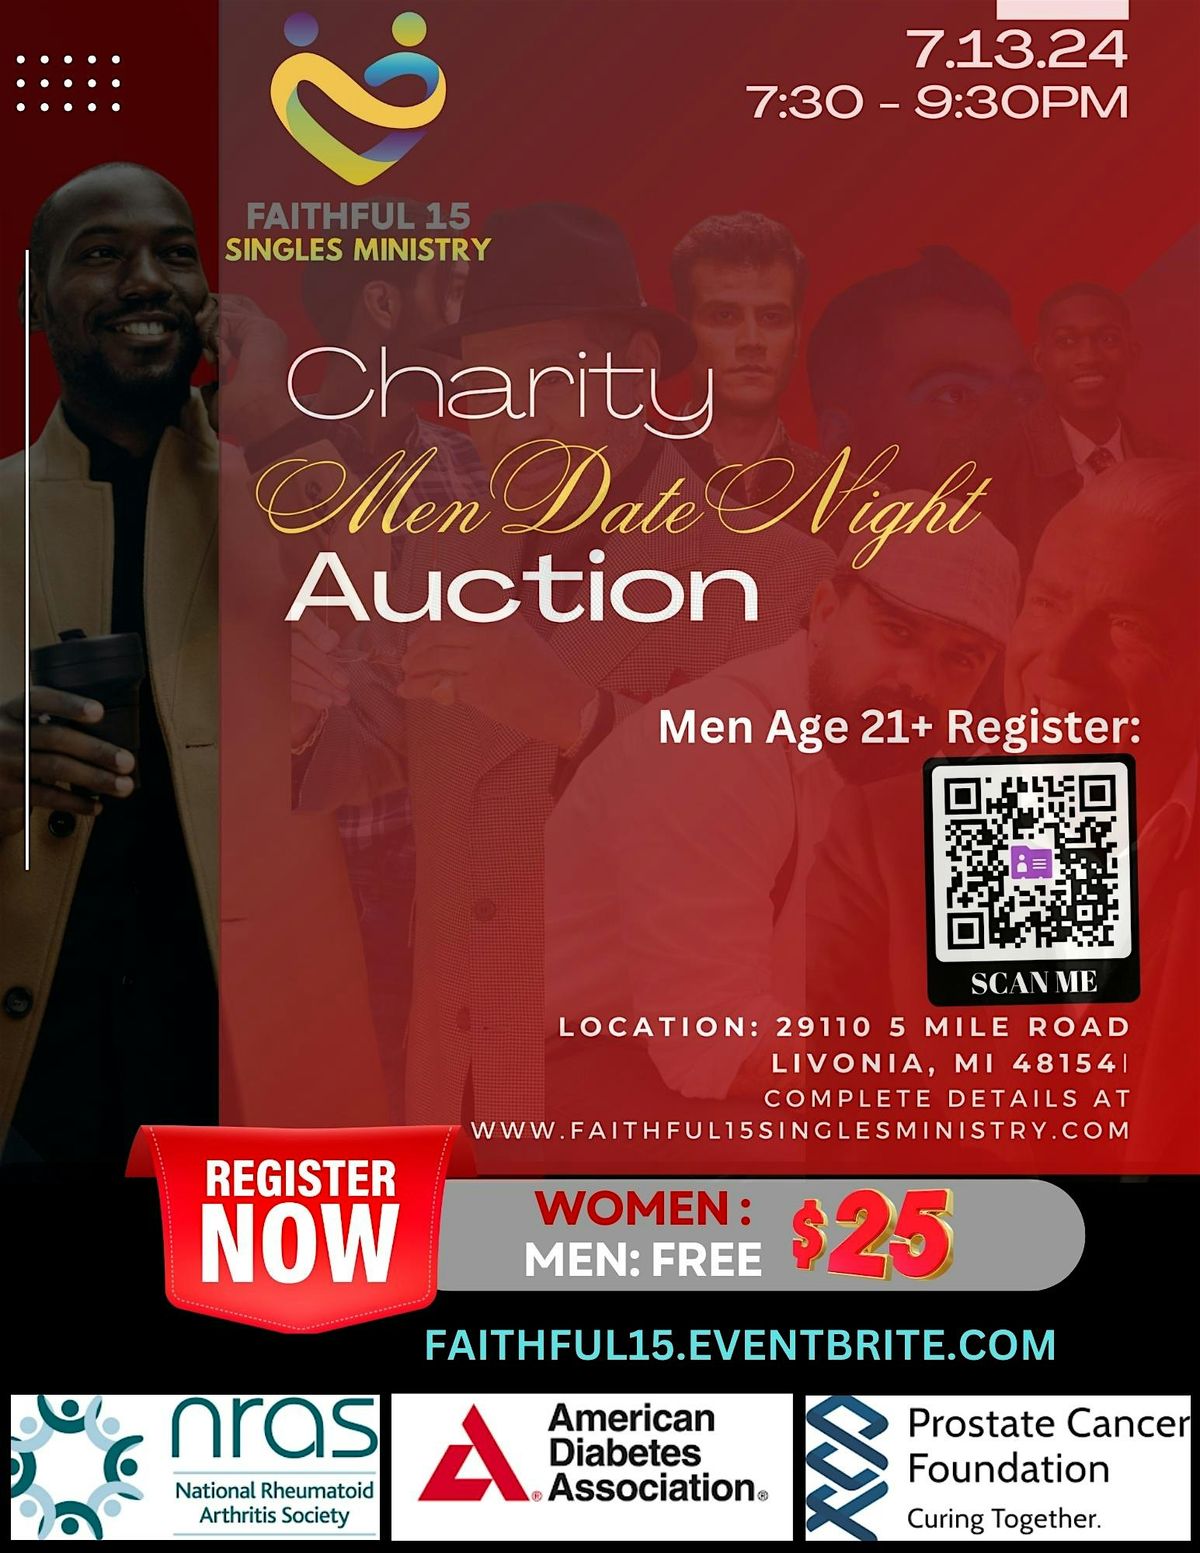 Christian Men Charity Date Night Auction